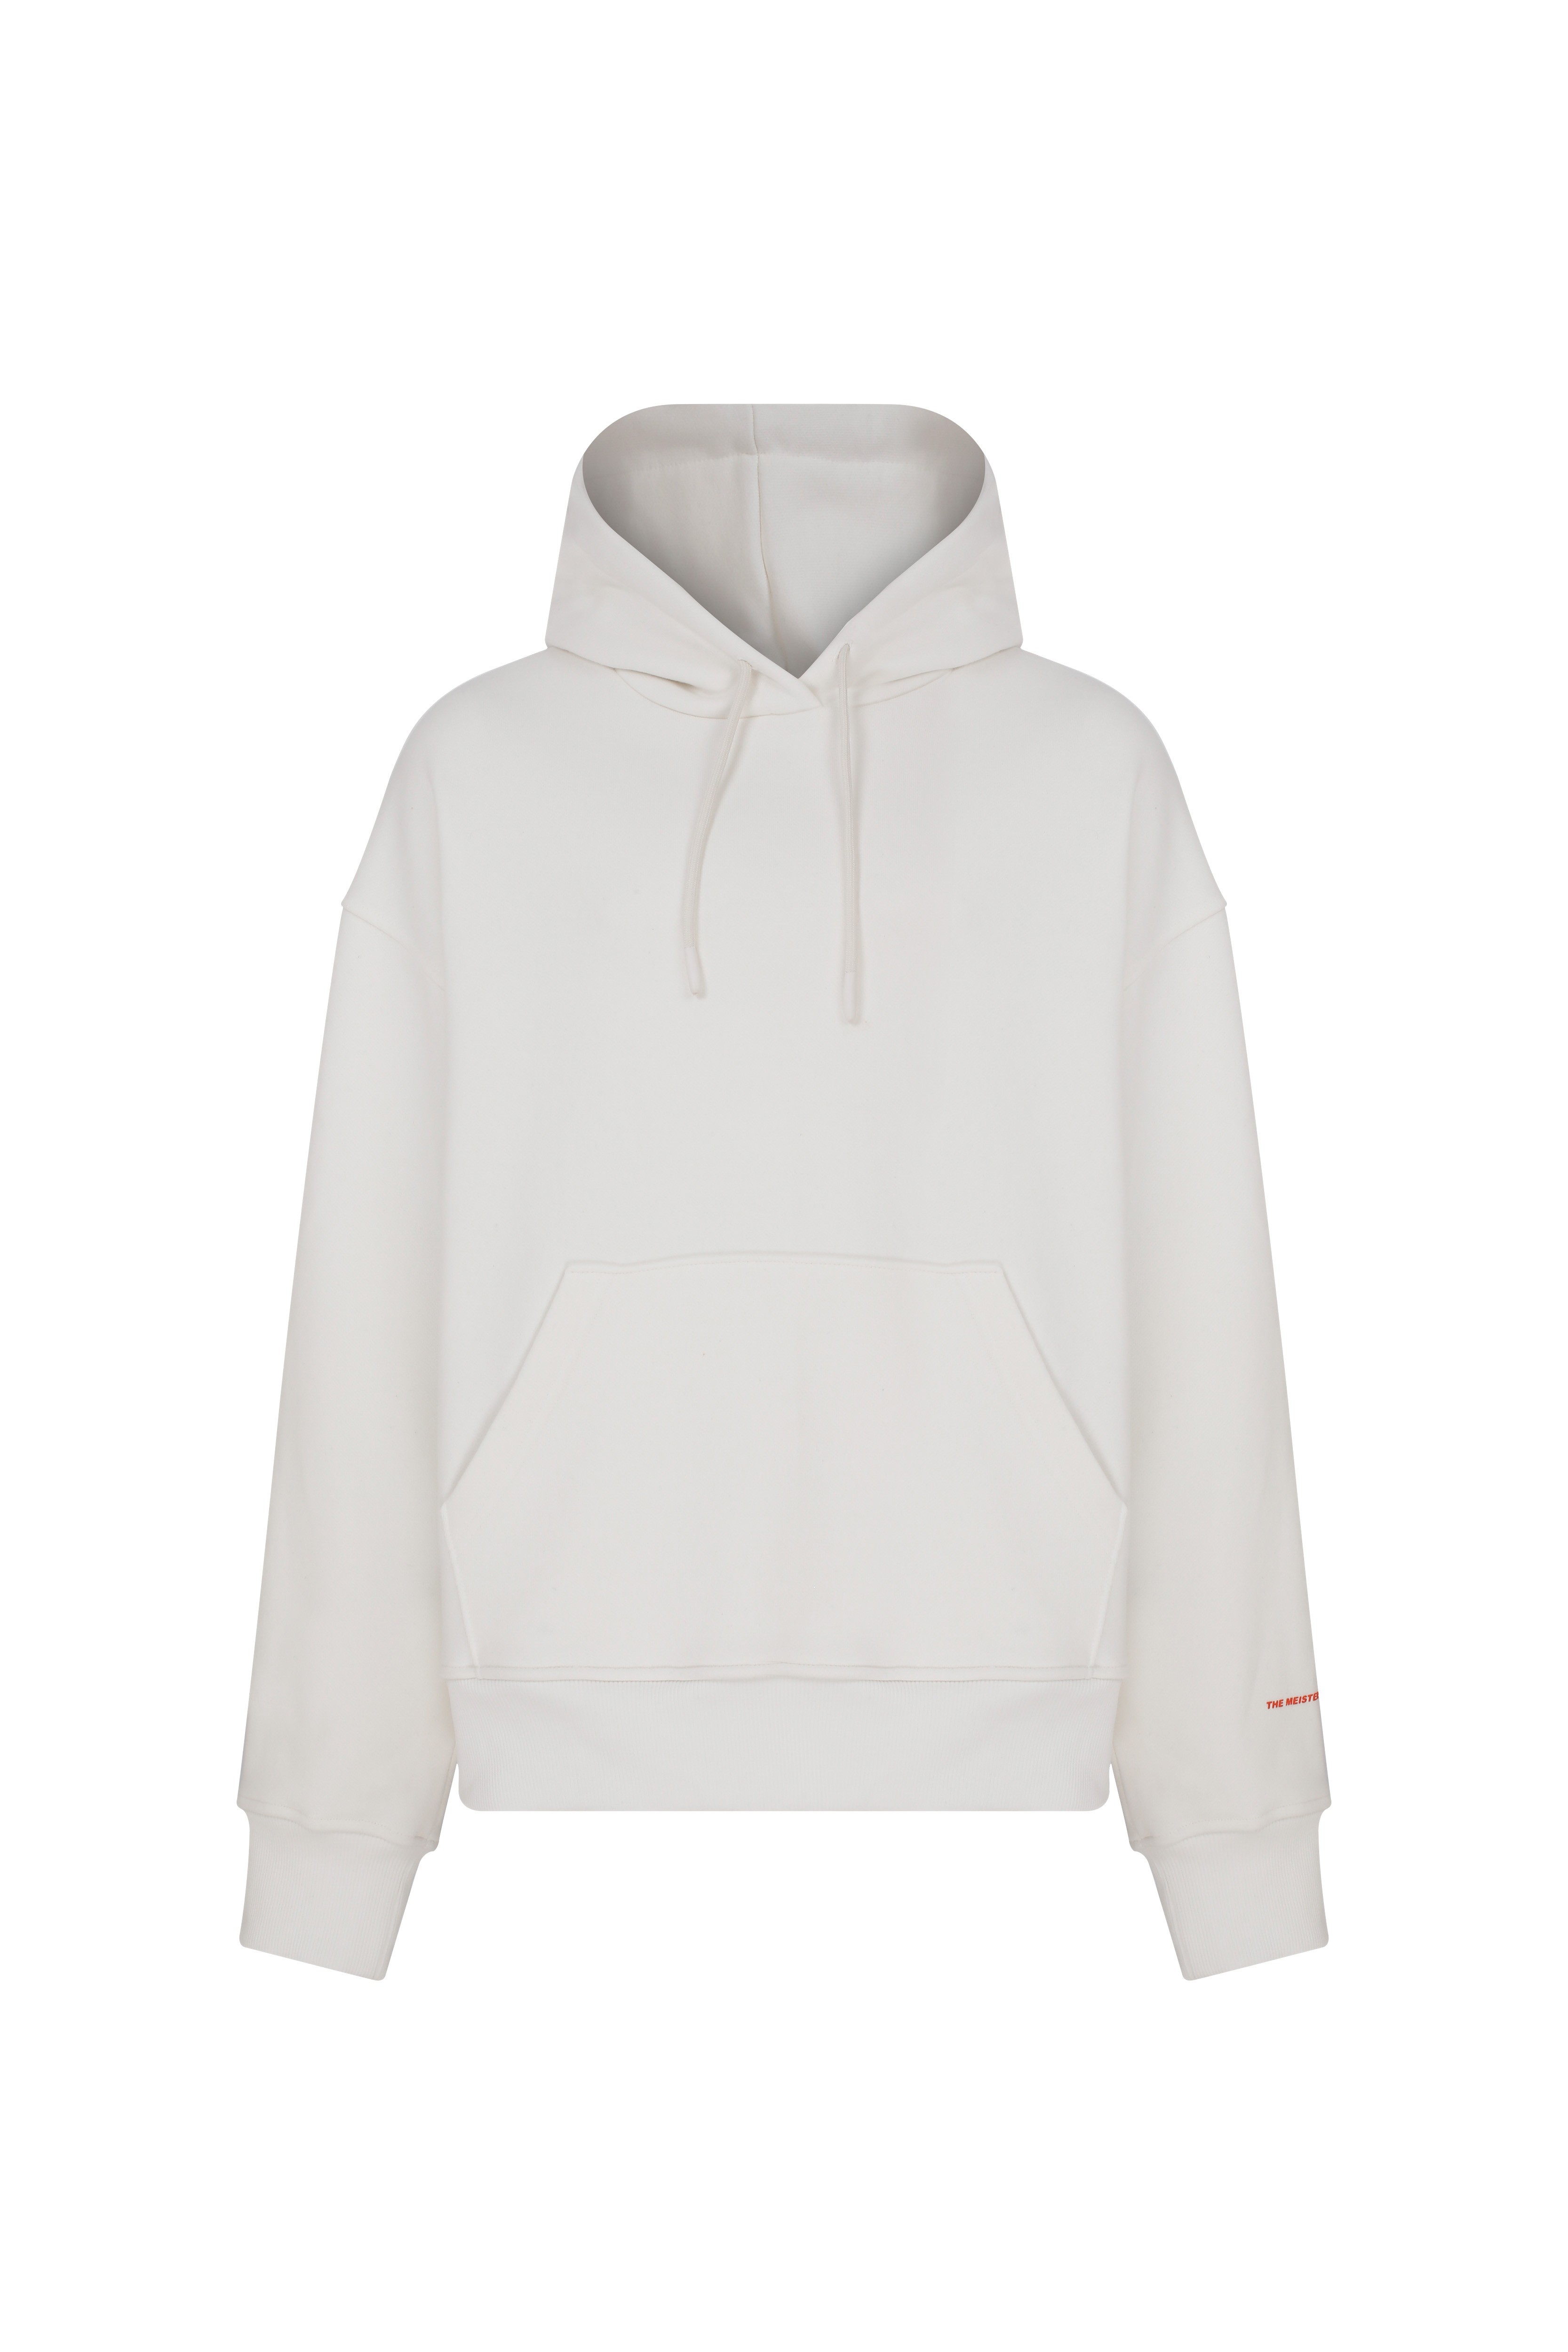 The Meister X Hole Academie Oversize Hoodie